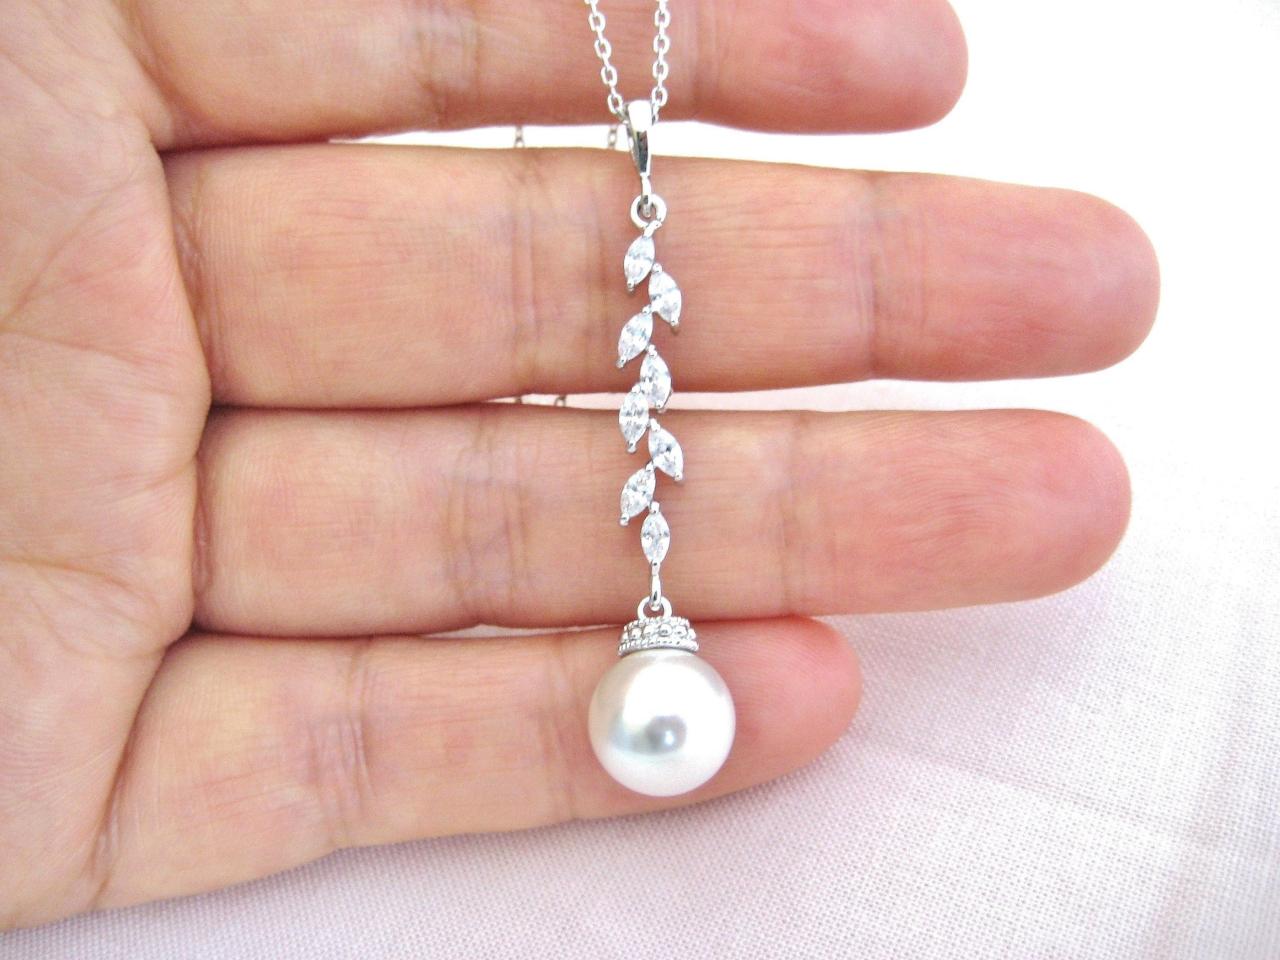 Bridal Pearl Necklace Wedding Jewelry Swarovski 10mm Pearl Necklace Long Dangle Necklace Cubic Zirconia Necklace Bridesmaid Gift (n015)